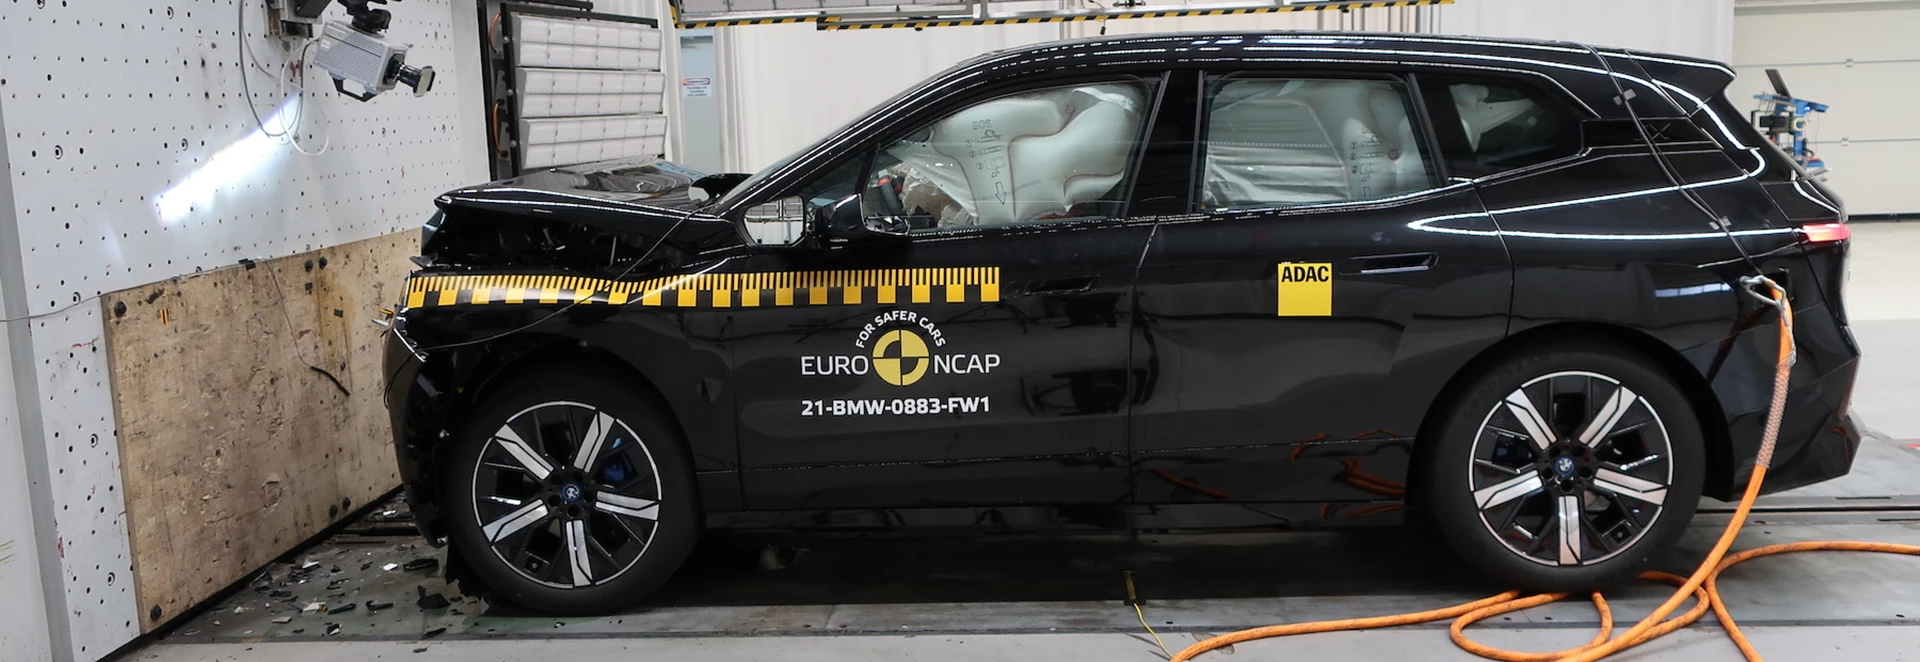 Latest Euro NCAP results announced with BMW iX scoring top marks 